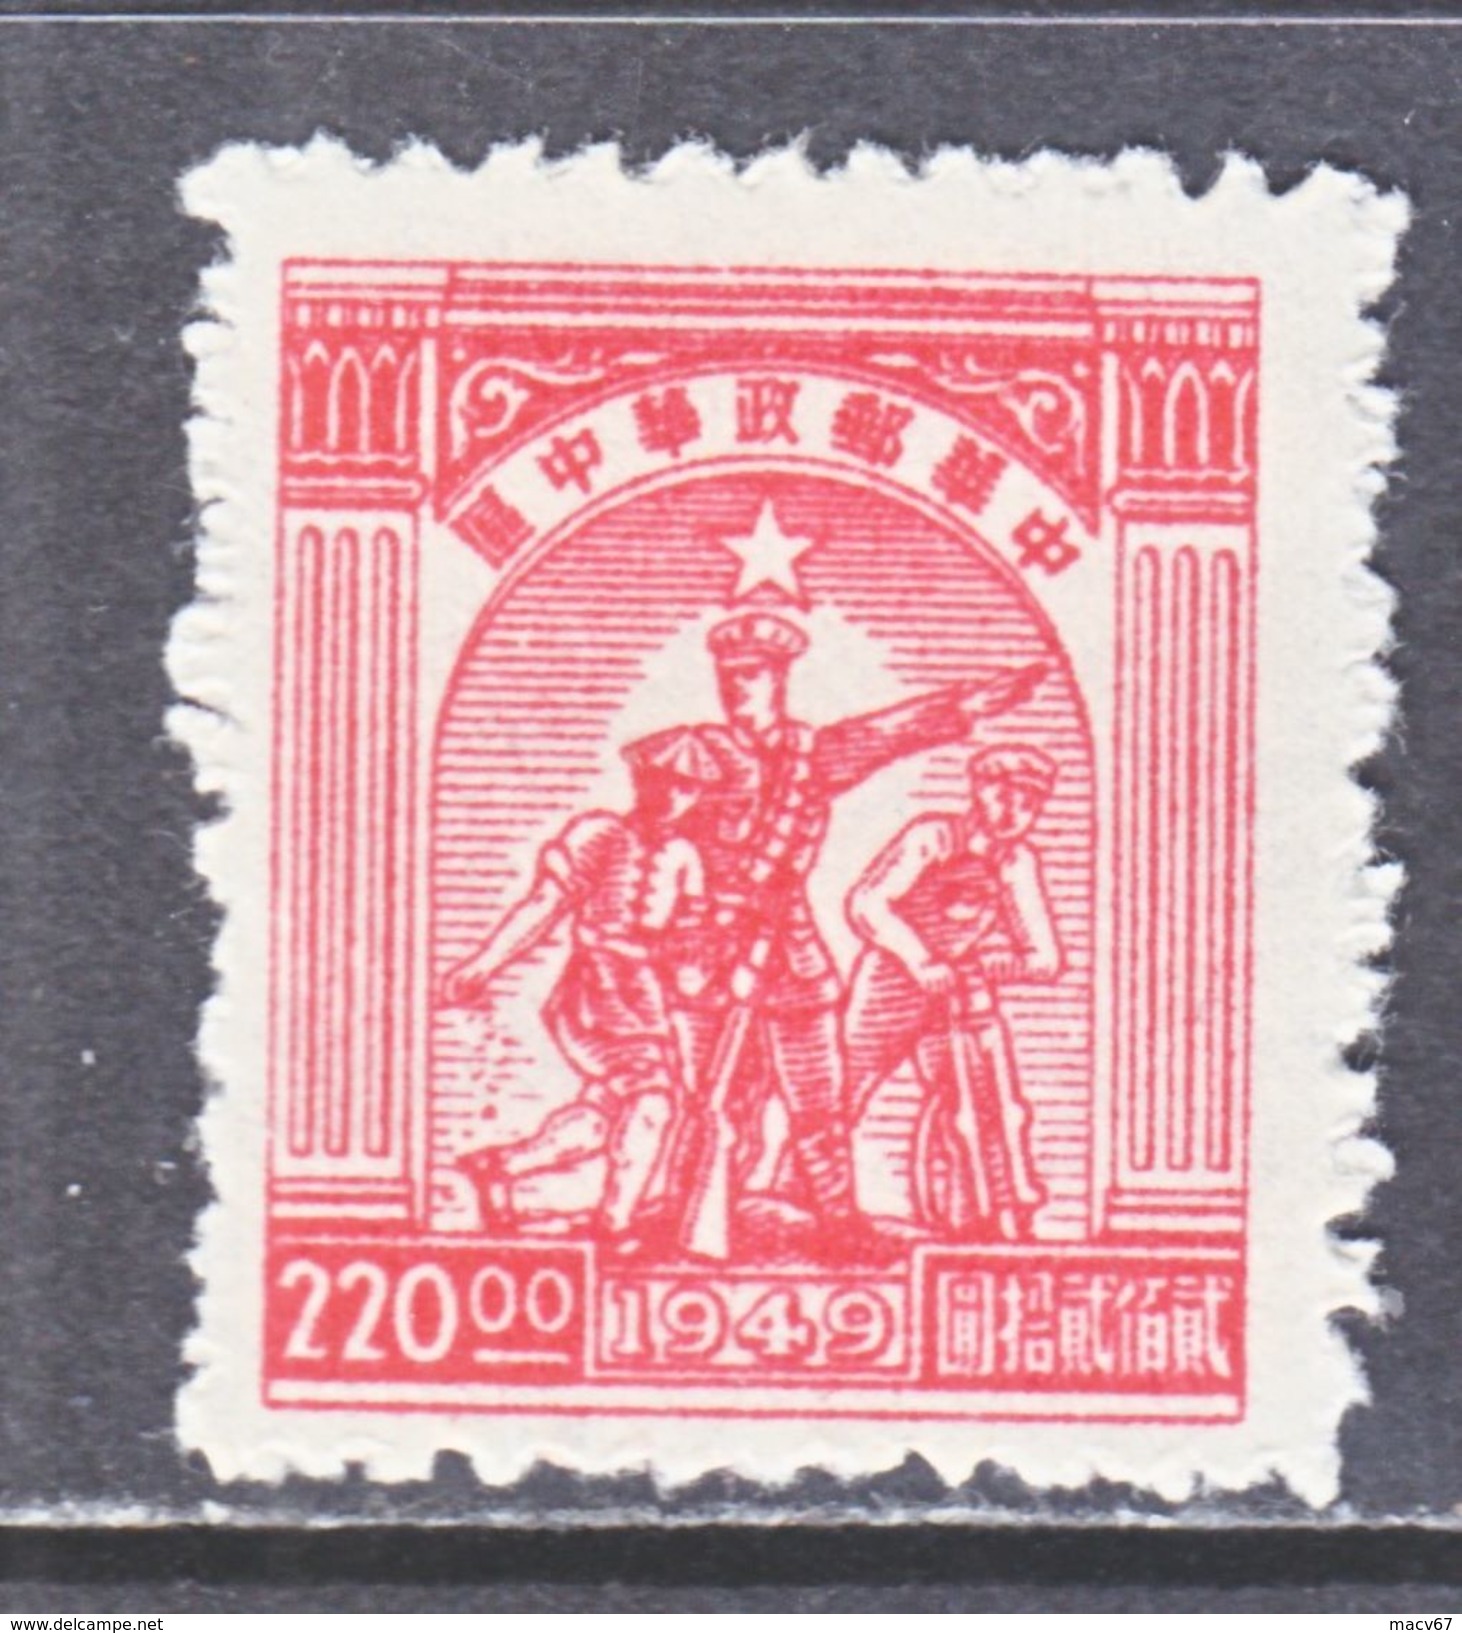 PRC  CENTRAL  CHINA  6 L 46  * - Centraal-China 1948-49